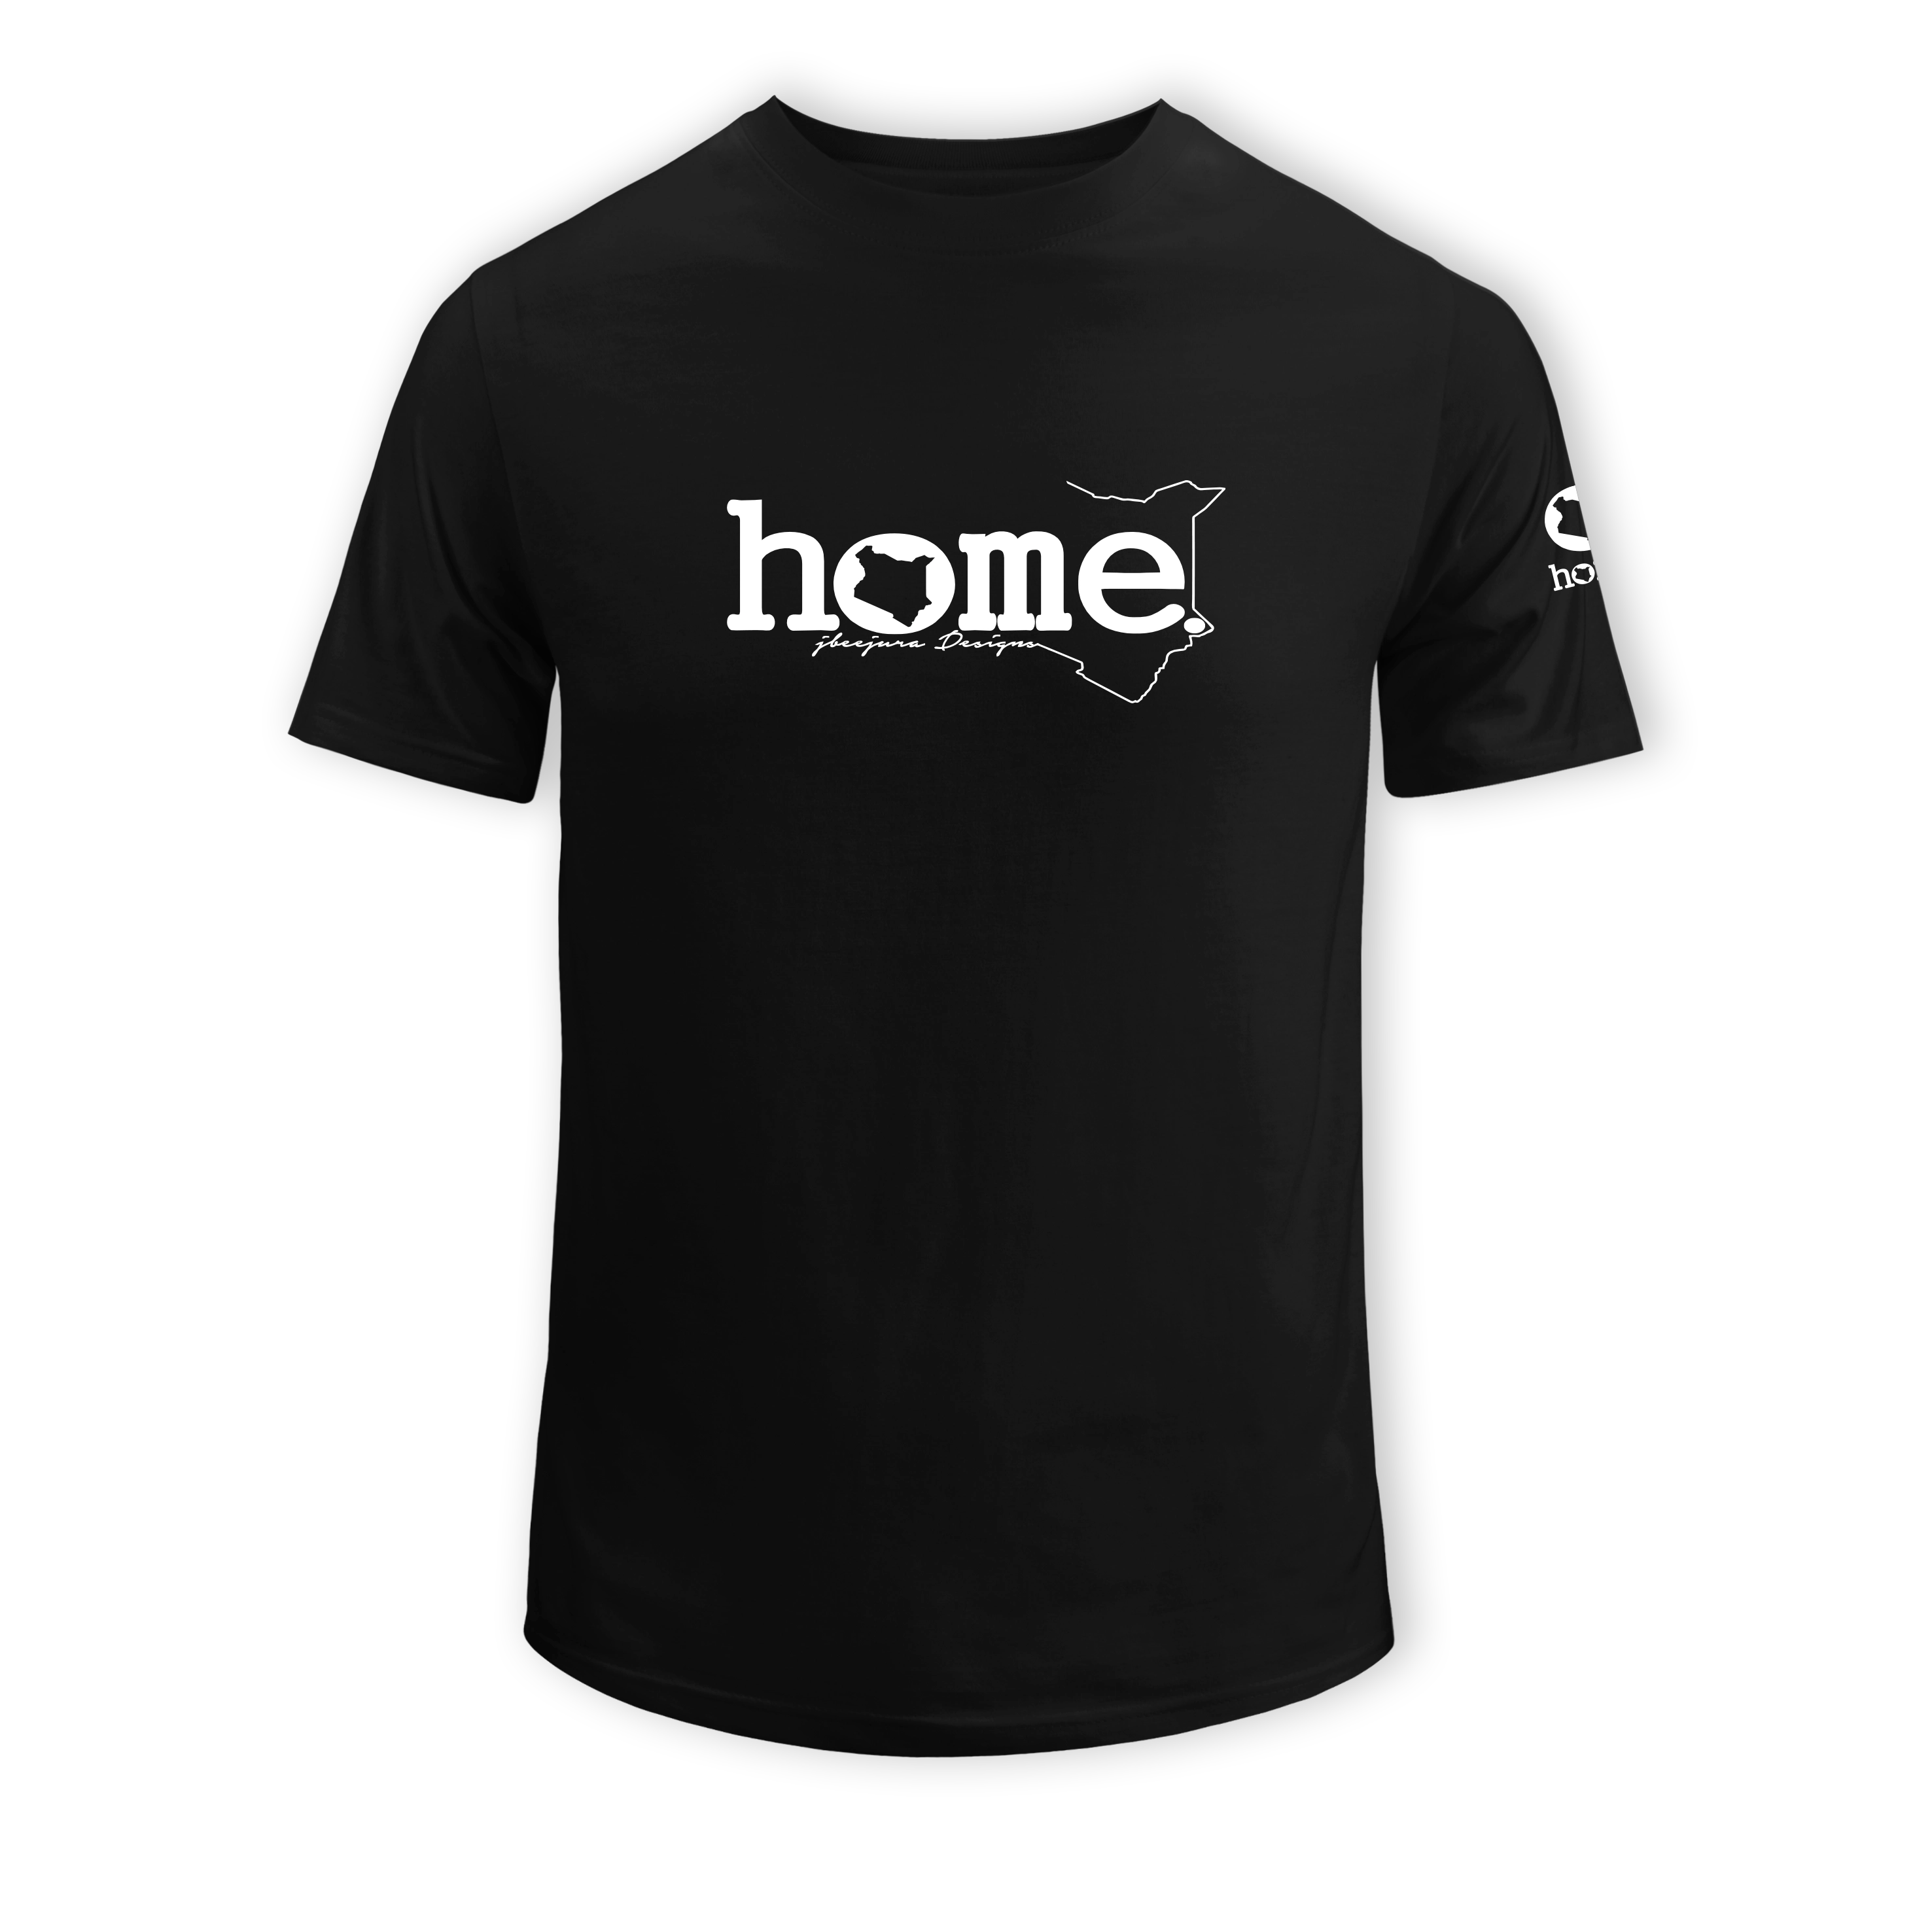 home_254 SHORT-SLEEVED BLACK T-SHIRT WITH A WHITE CLASSIC WORDS PRINT – COTTON PLUS FABRIC